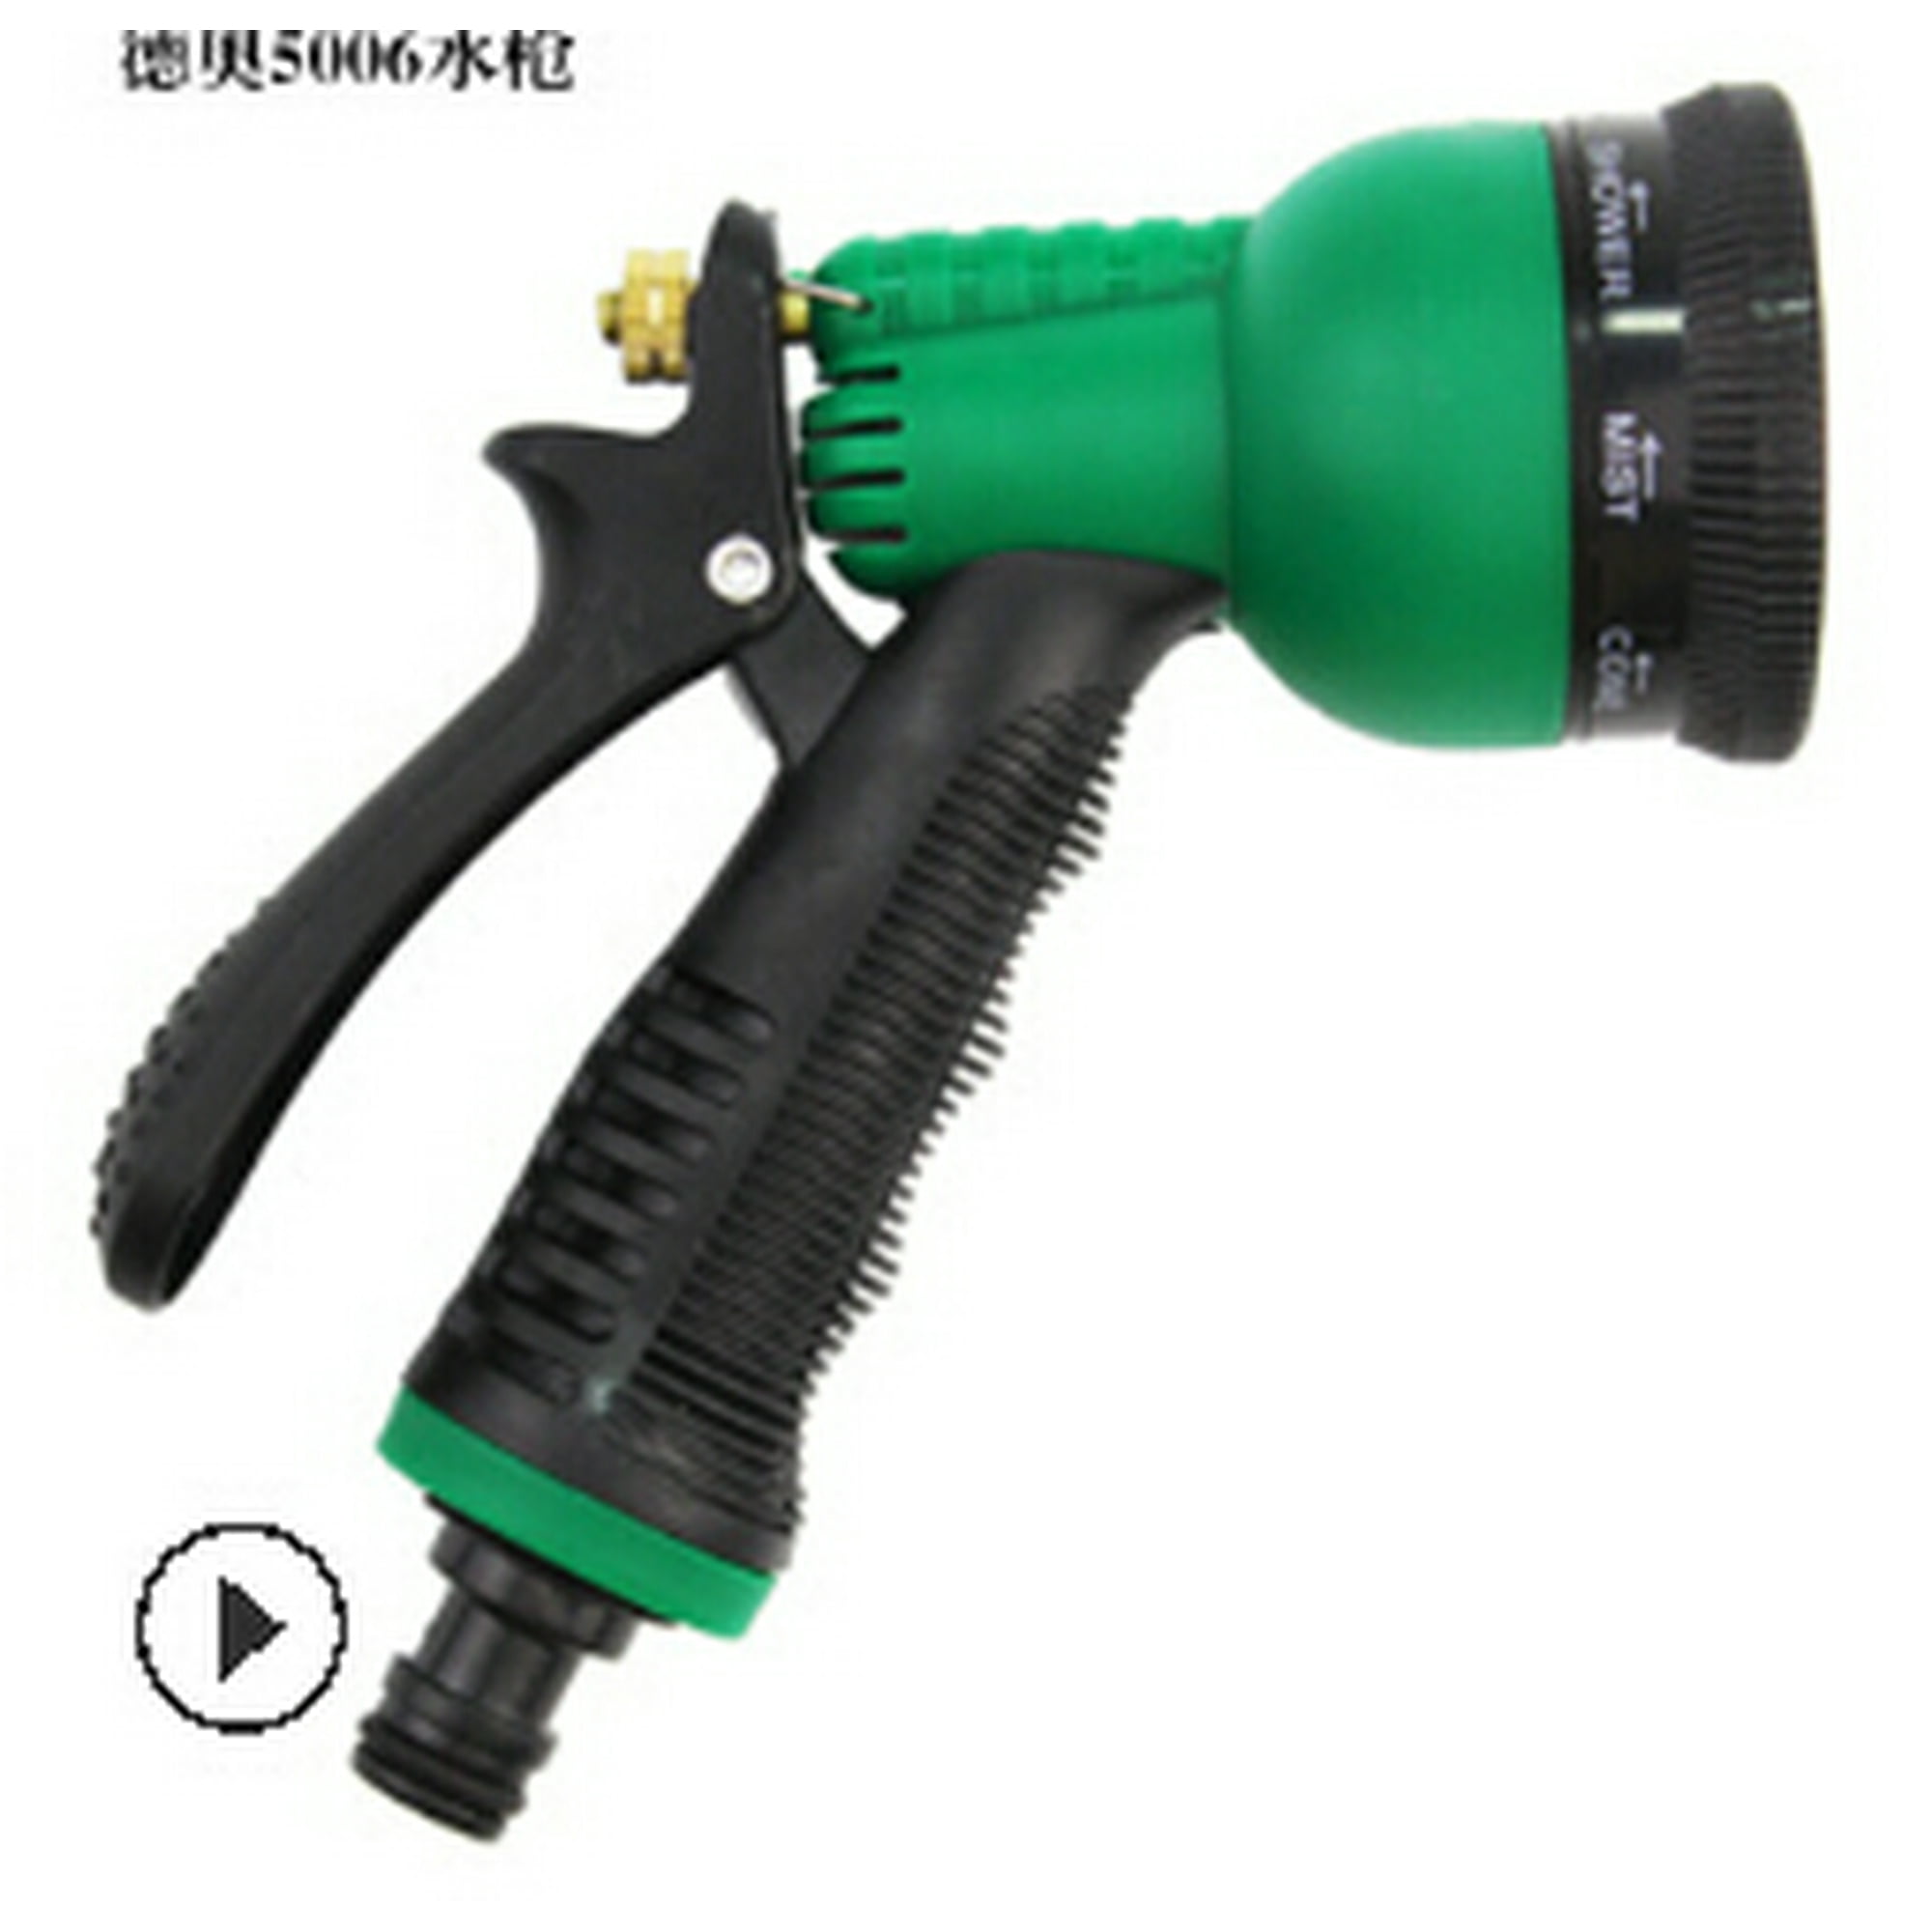 Garden Hose Nozzle High Pressure Water Spray Gun Nozzle For Watering Lawns Car Washing And Pets Showering Walmart Canada